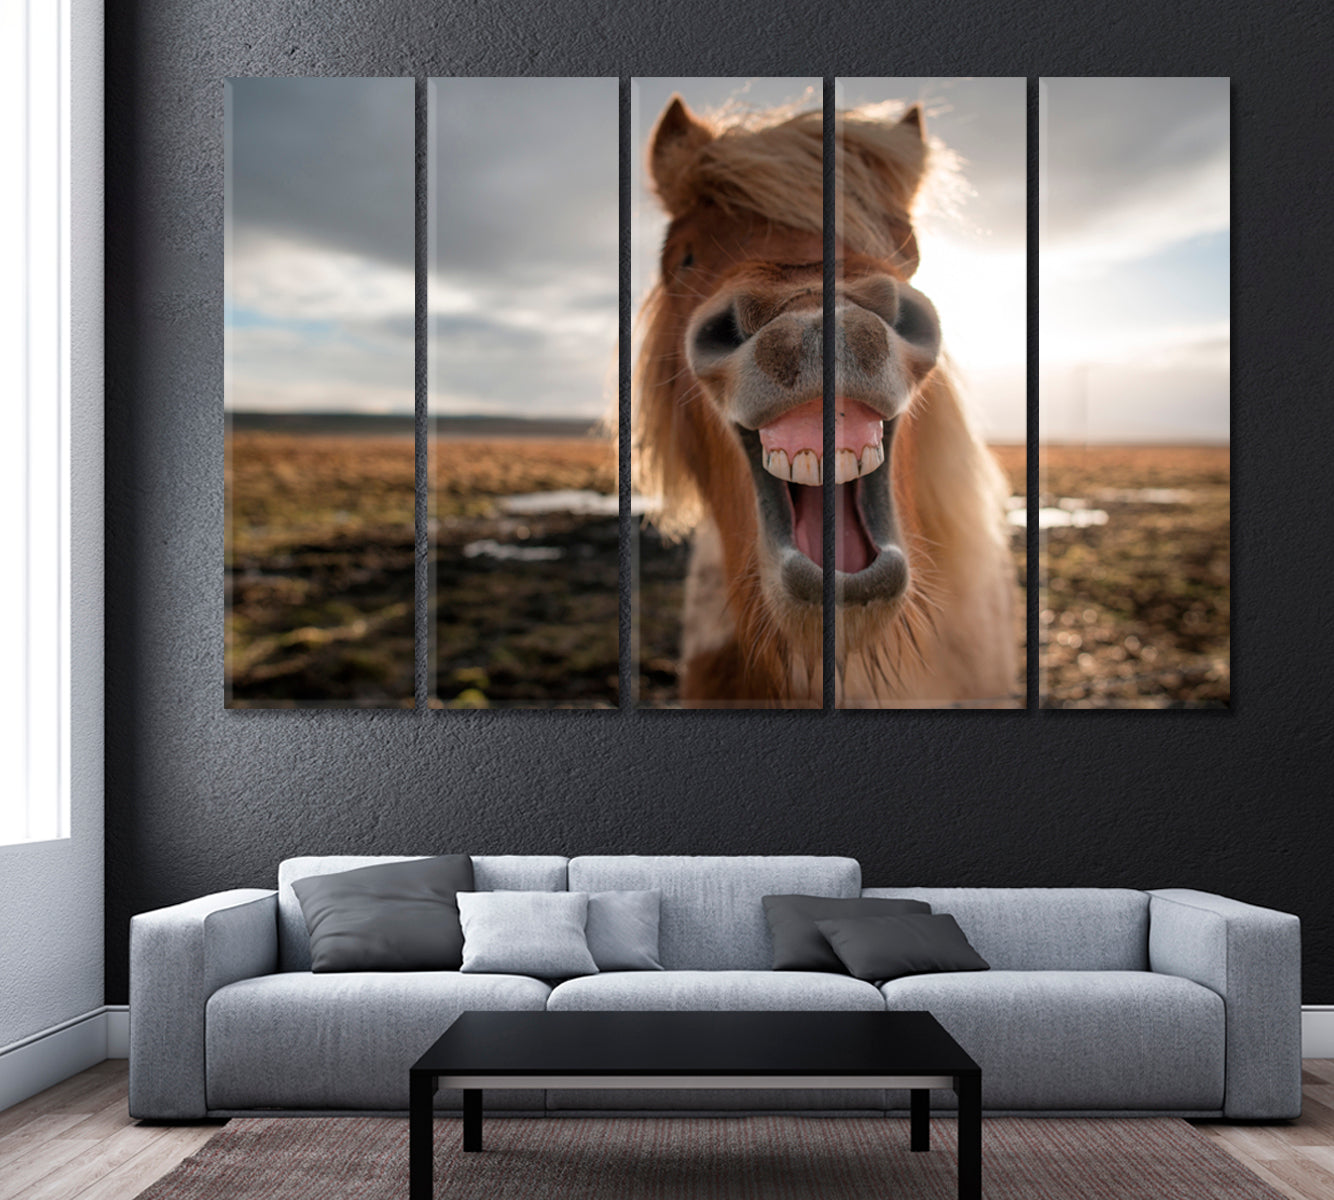 Smiling Icelandic Horse Canvas Print ArtLexy 5 Panels 36"x24" inches 